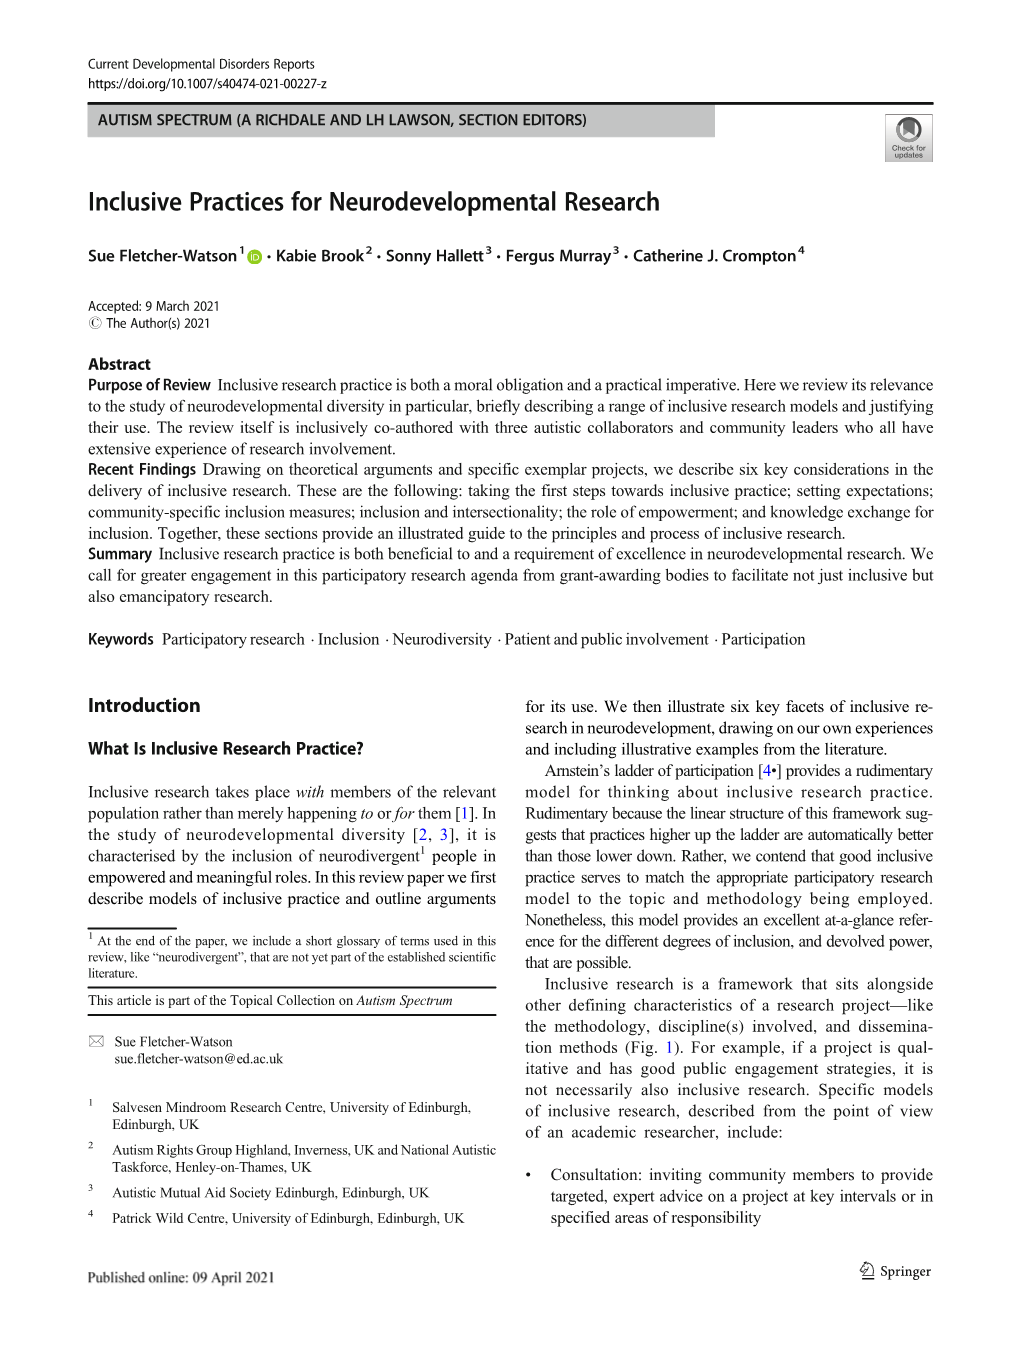 Inclusive Practices for Neurodevelopmental Research